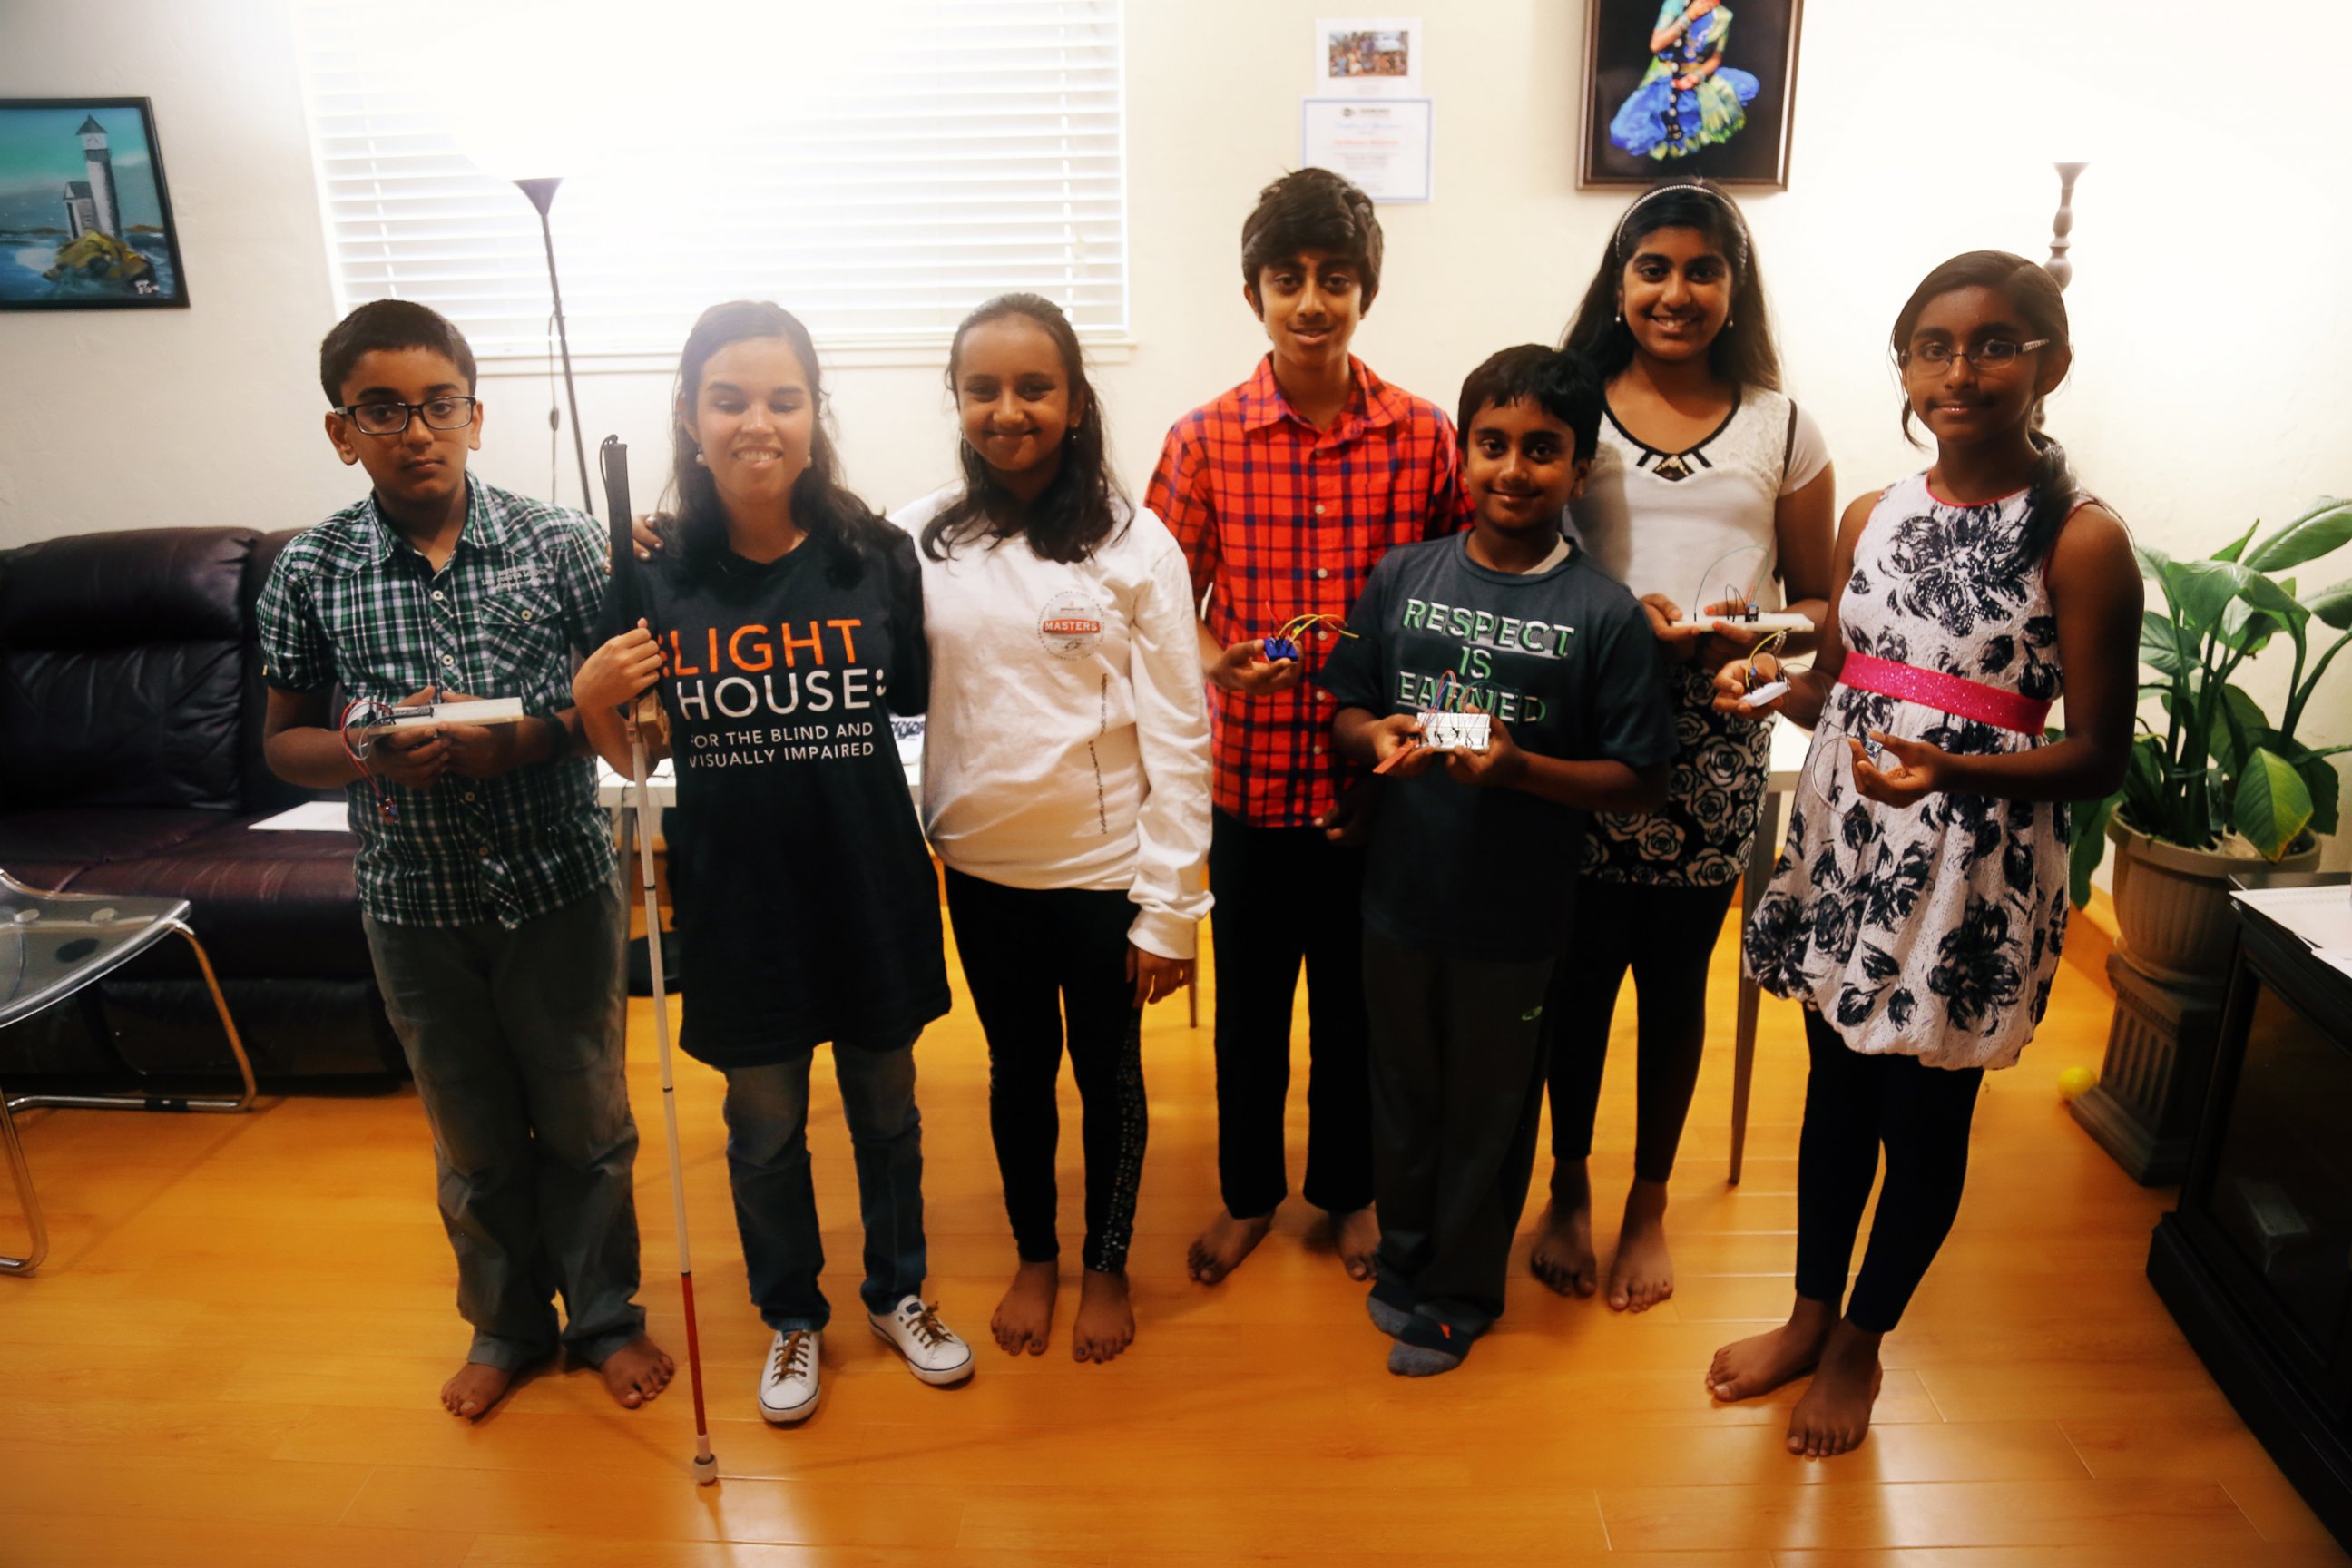 PHOTO: Hari Bhimaraju, 12, poses with her "Monkey Science" students at home in Cupertino, California.